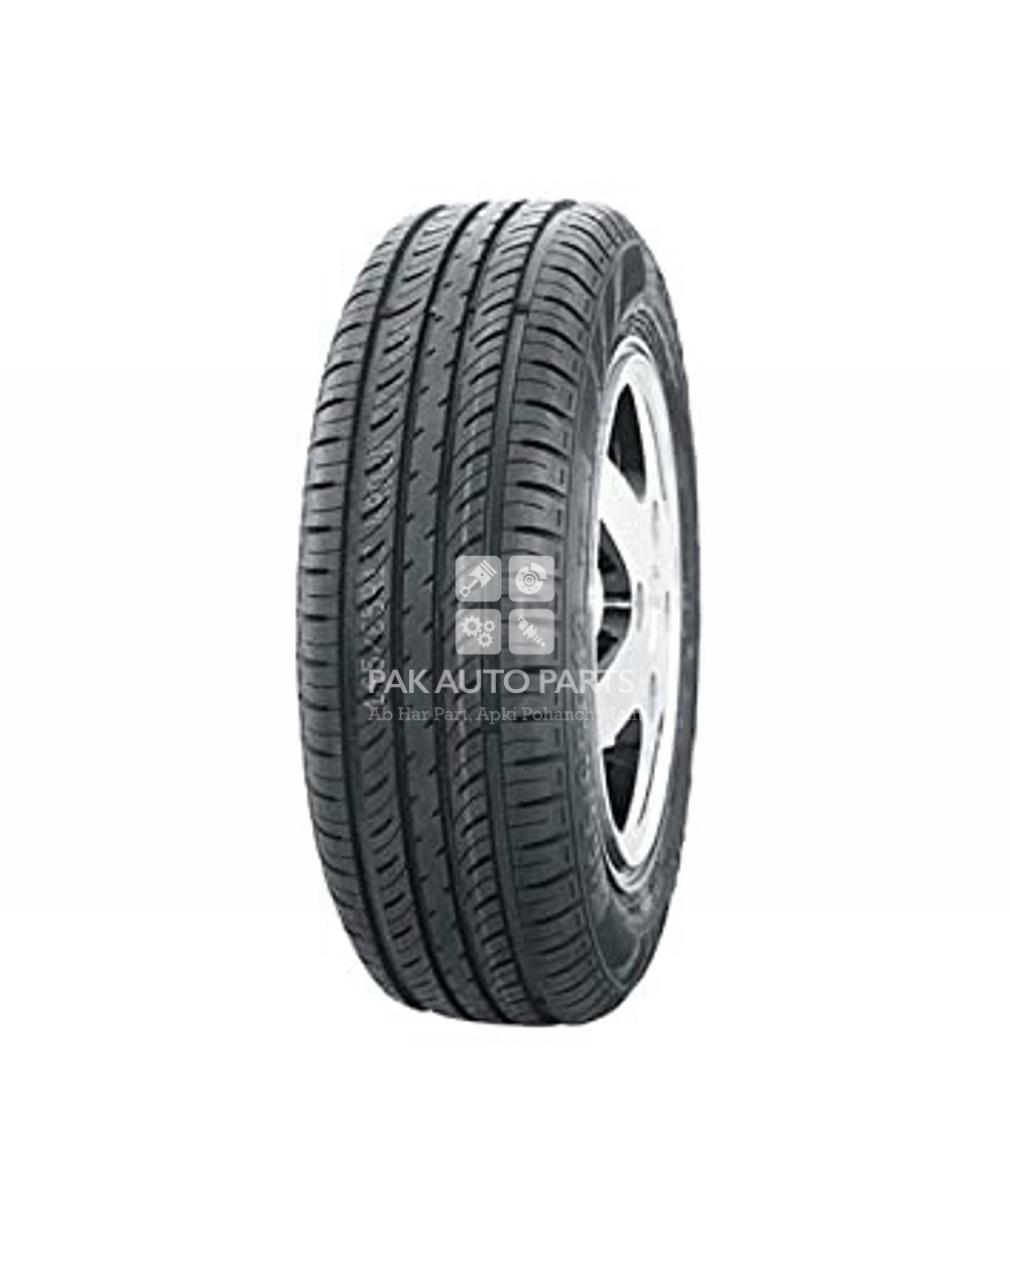 Picture of Wanda Tyre 165/65 R14